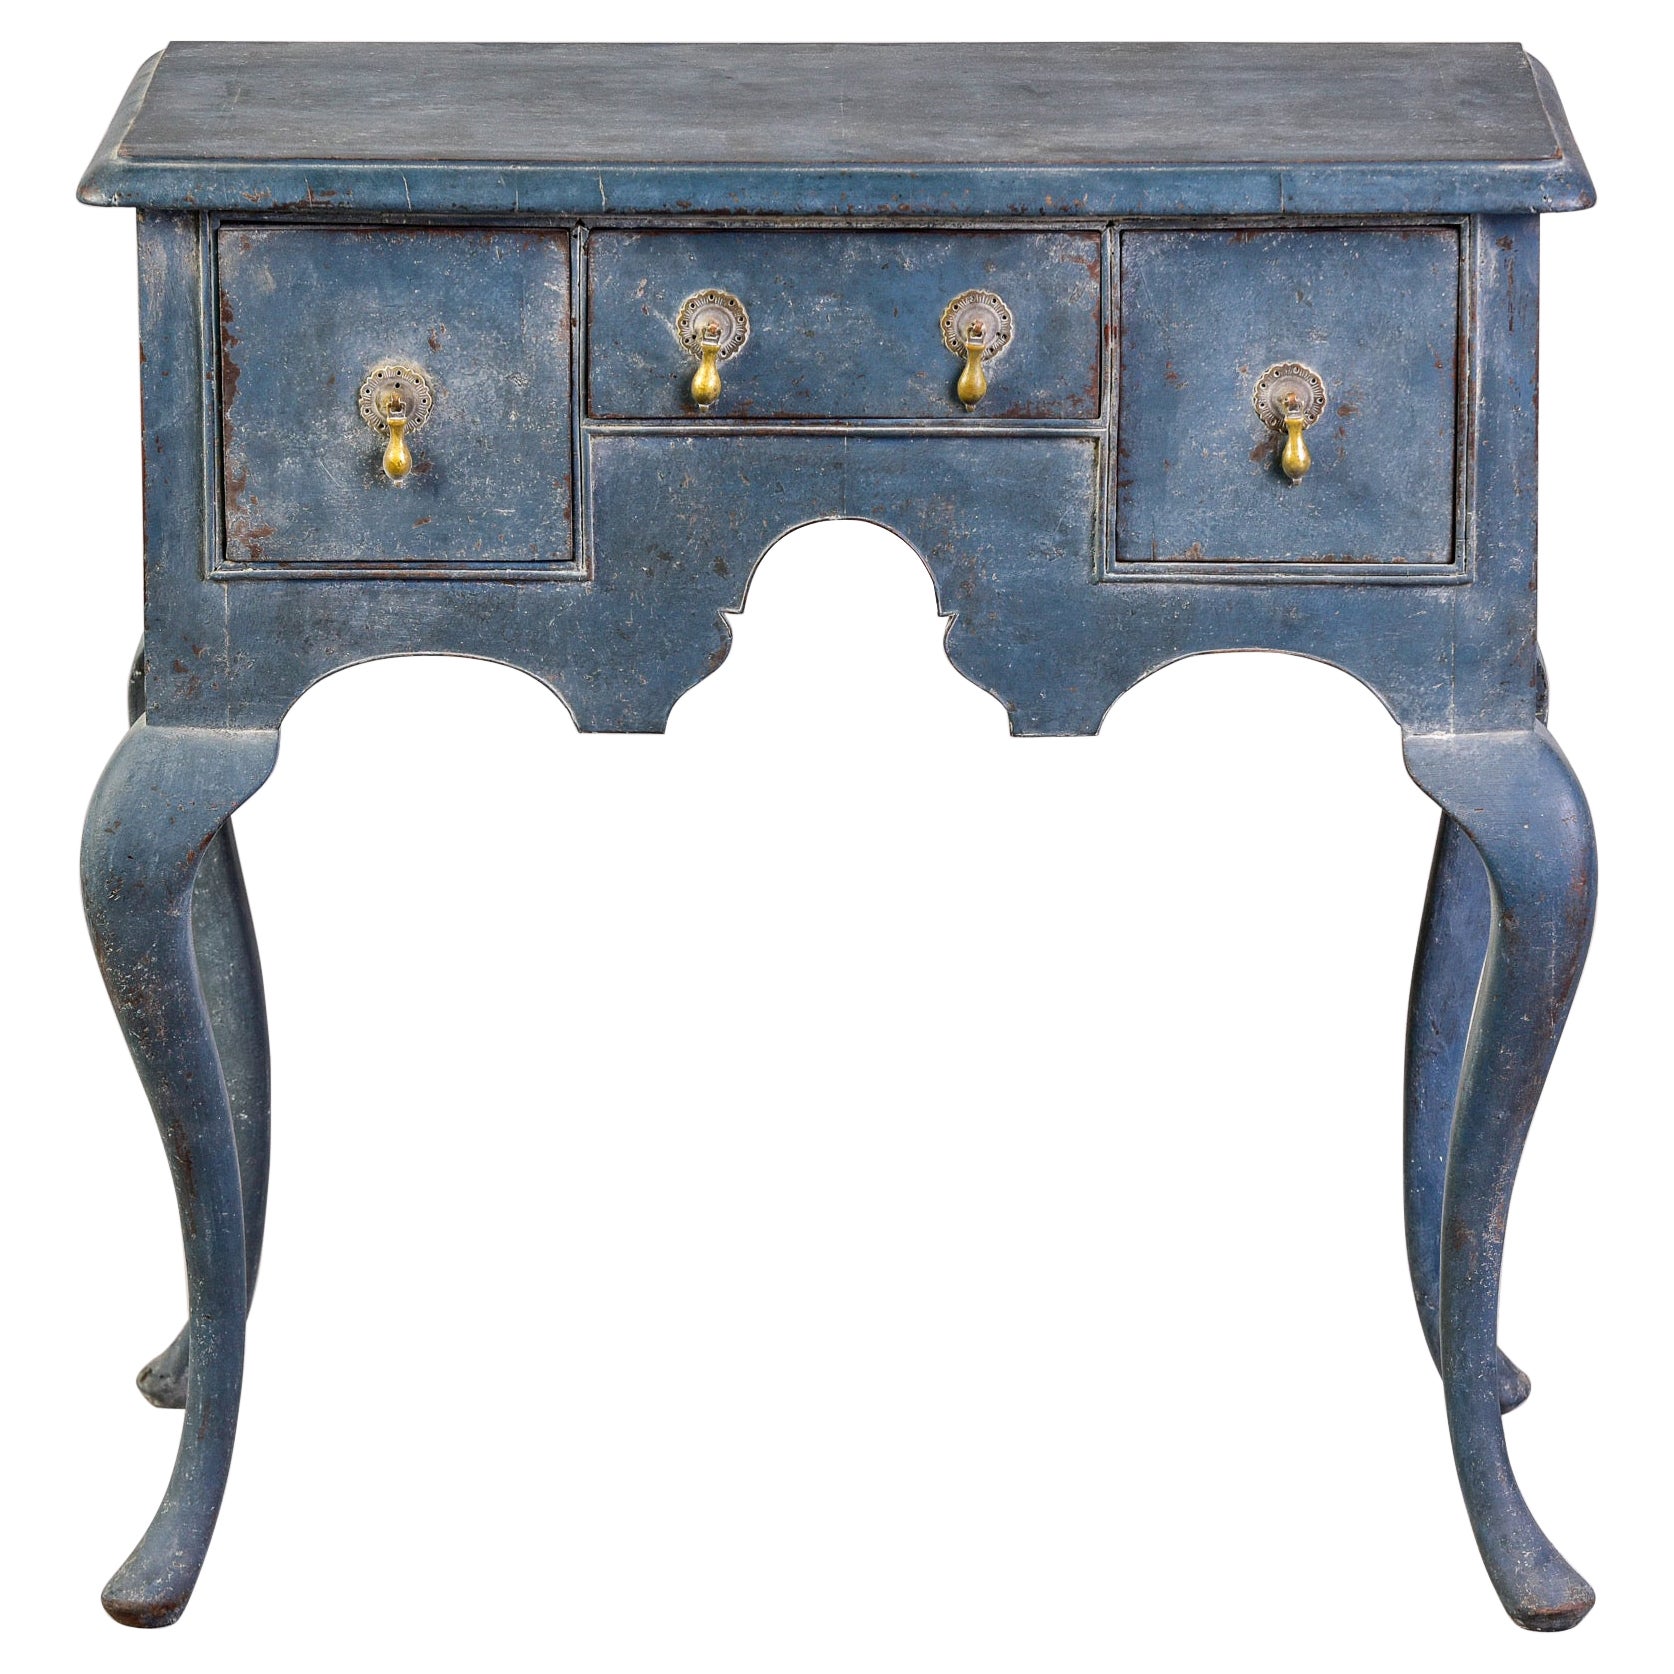 Small 18th C English Three Drawer Lowboy / Lamp Table with Blue Paint